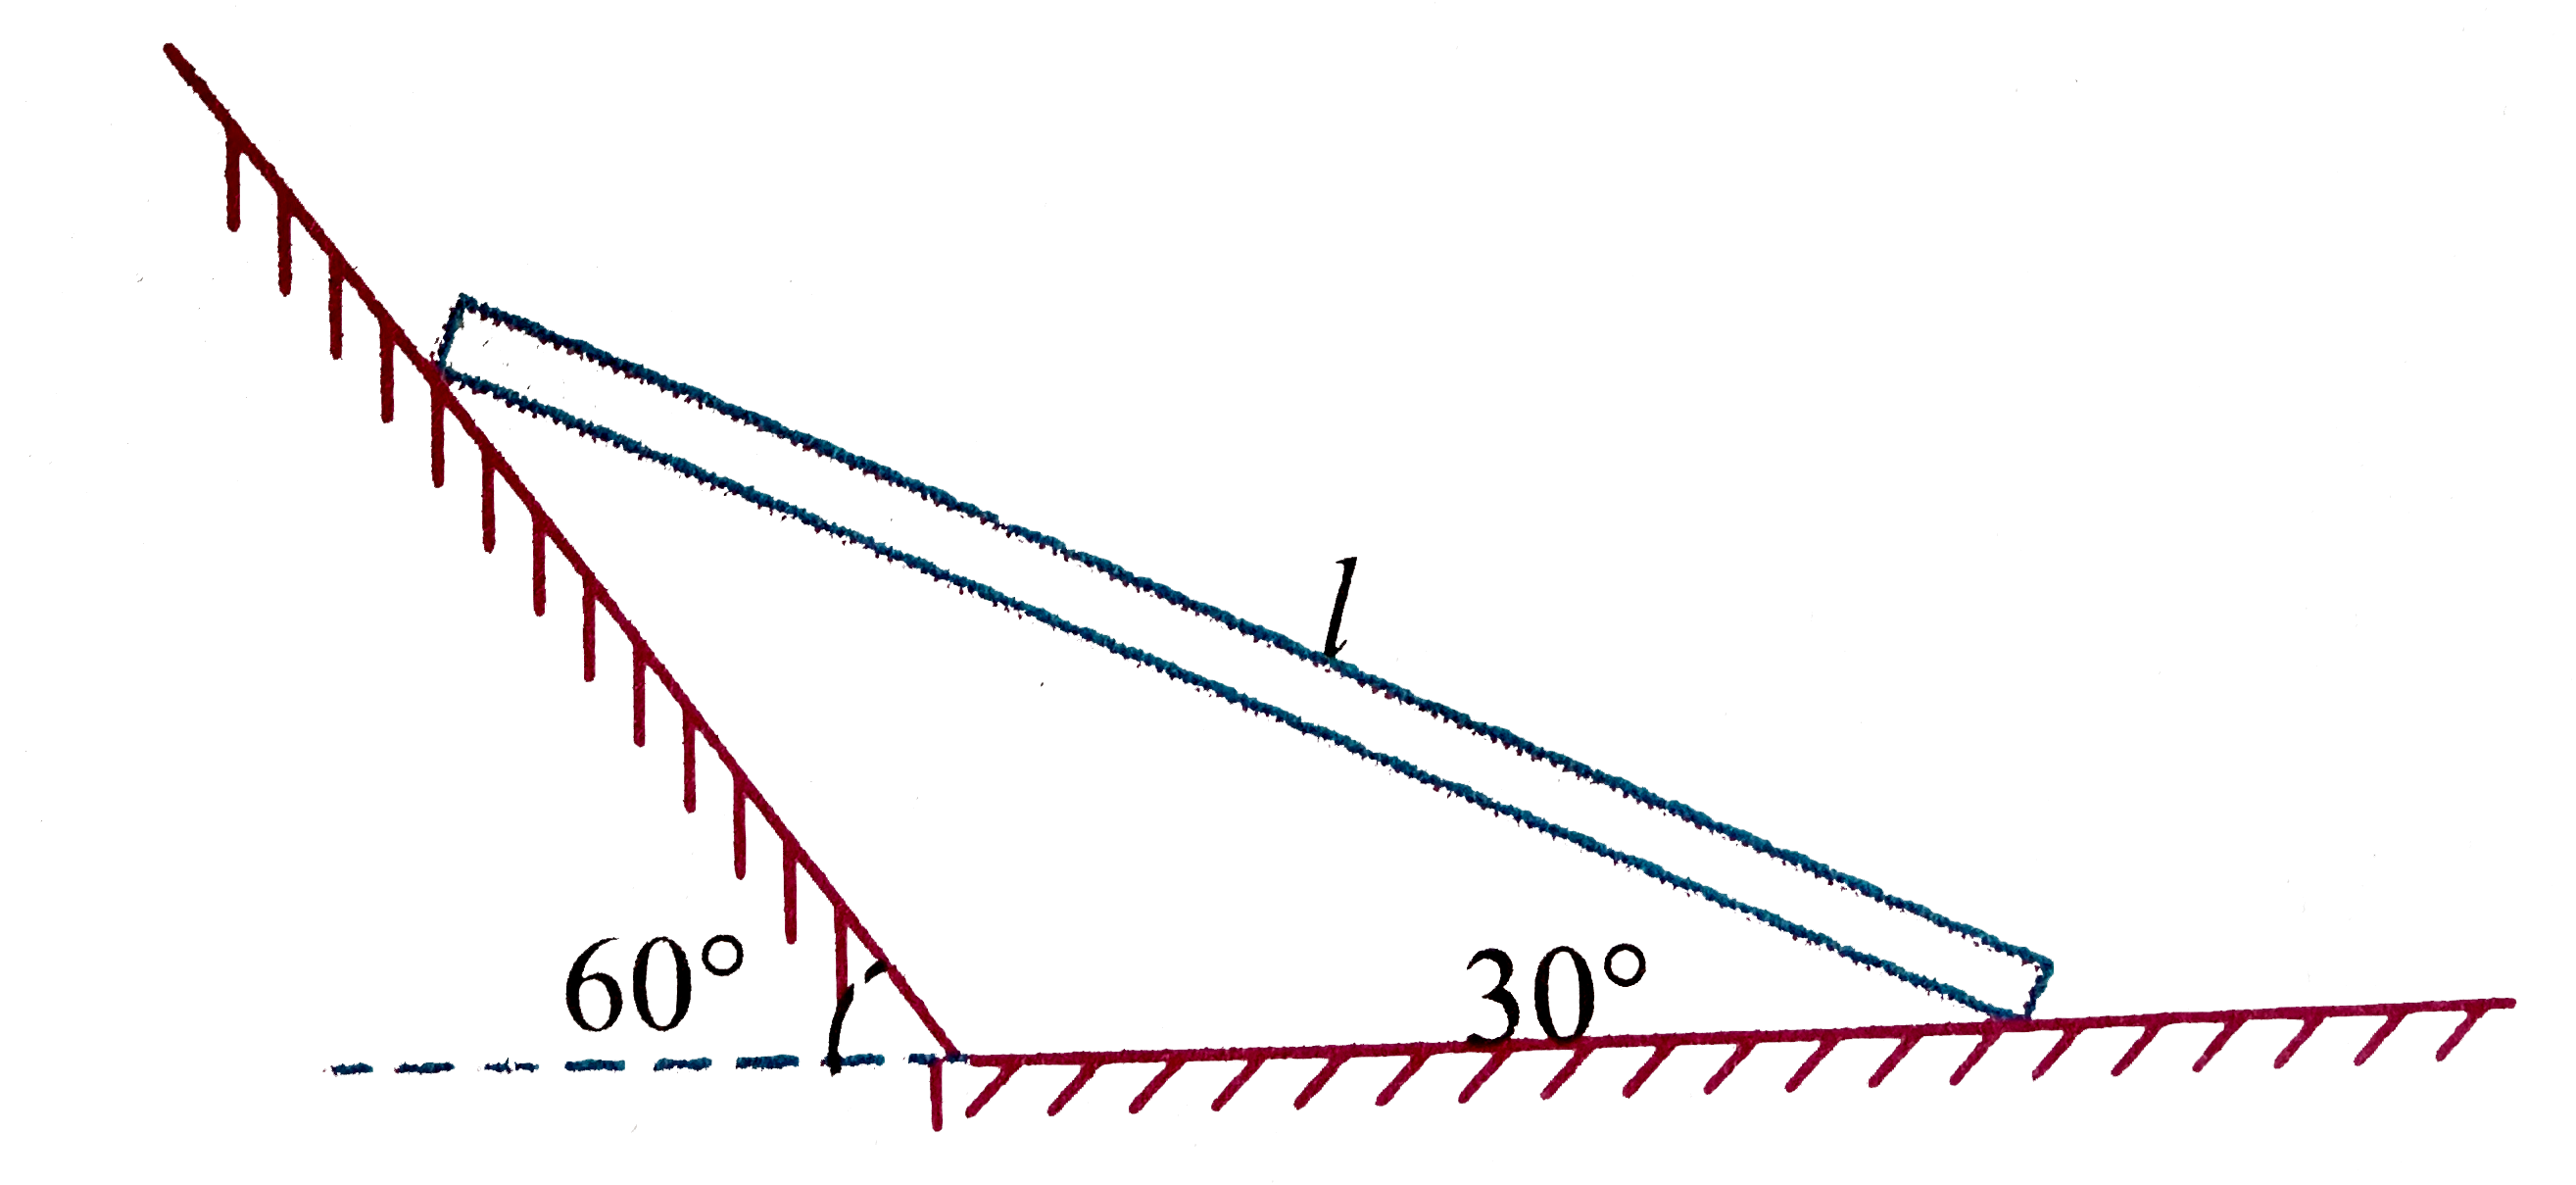 A uniform rod of length l is released from the position shown in the figure. The acceleration due to gravity is g. There is no friction at any surface. Find the initial angular acceleration of the rod.